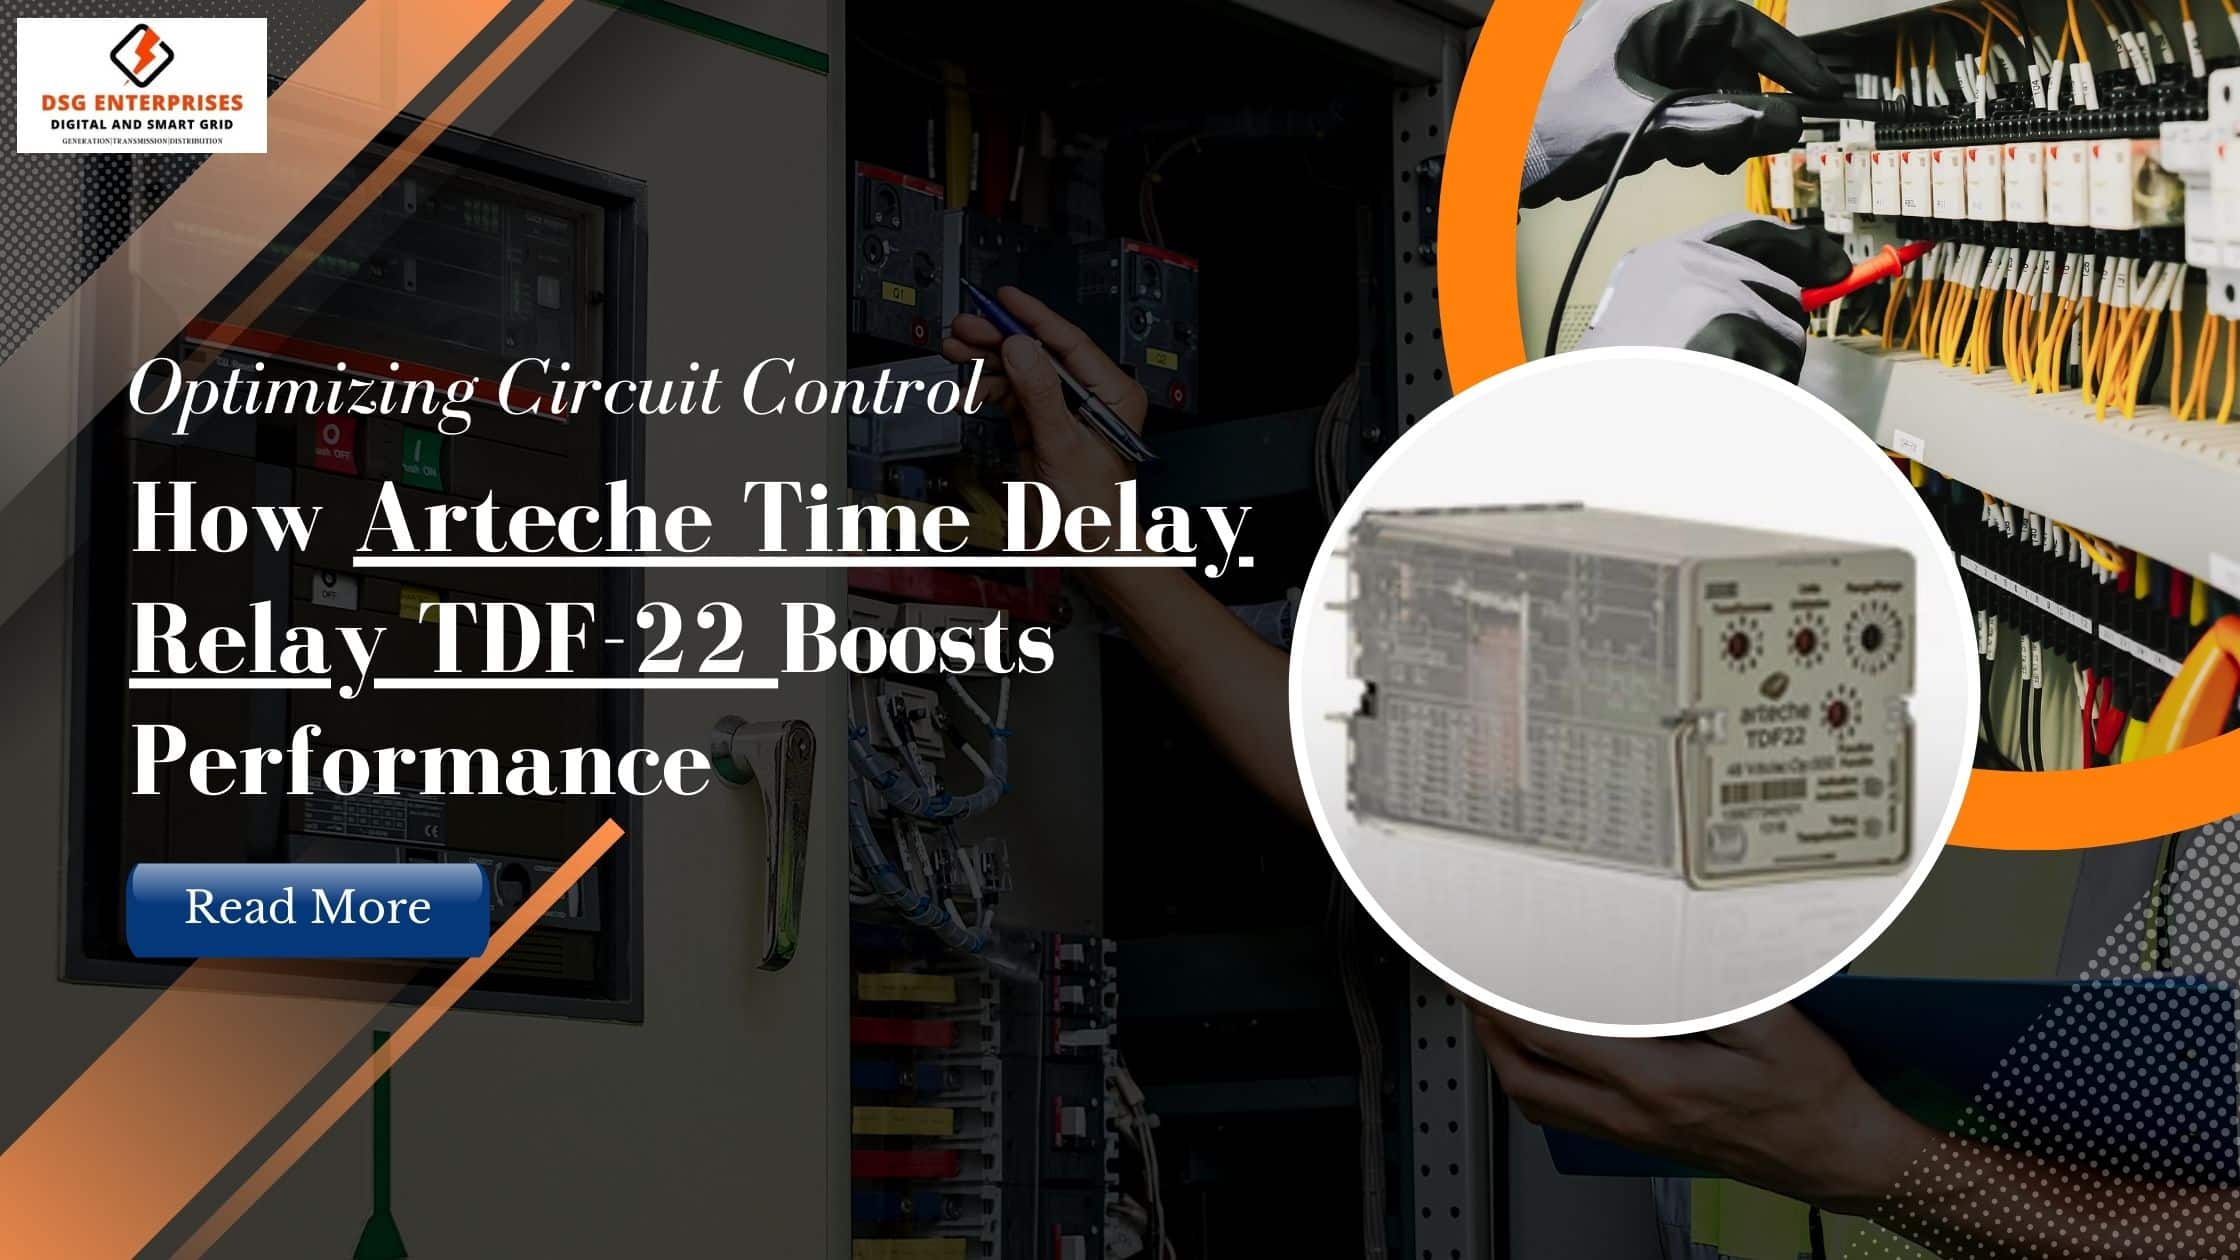 You are currently viewing Optimizing Circuit Control: How Arteche Time Delay Relay TDF-22 Boosts Performance